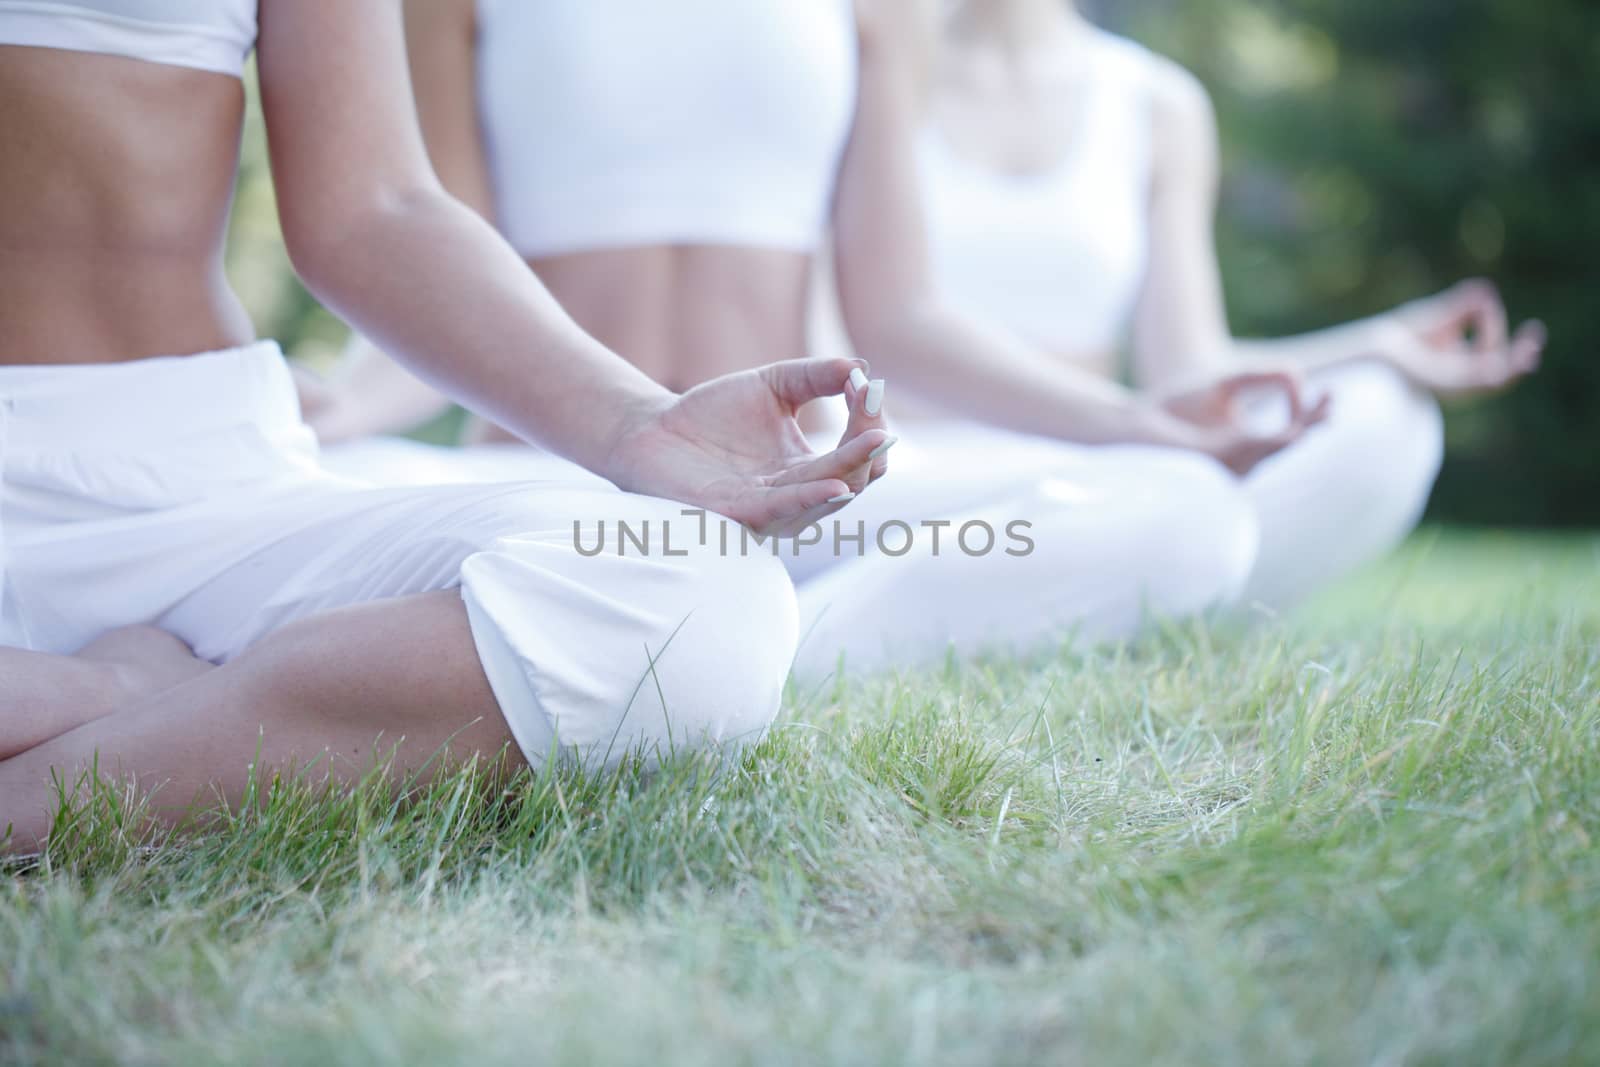 Yoga women training at park by ALotOfPeople